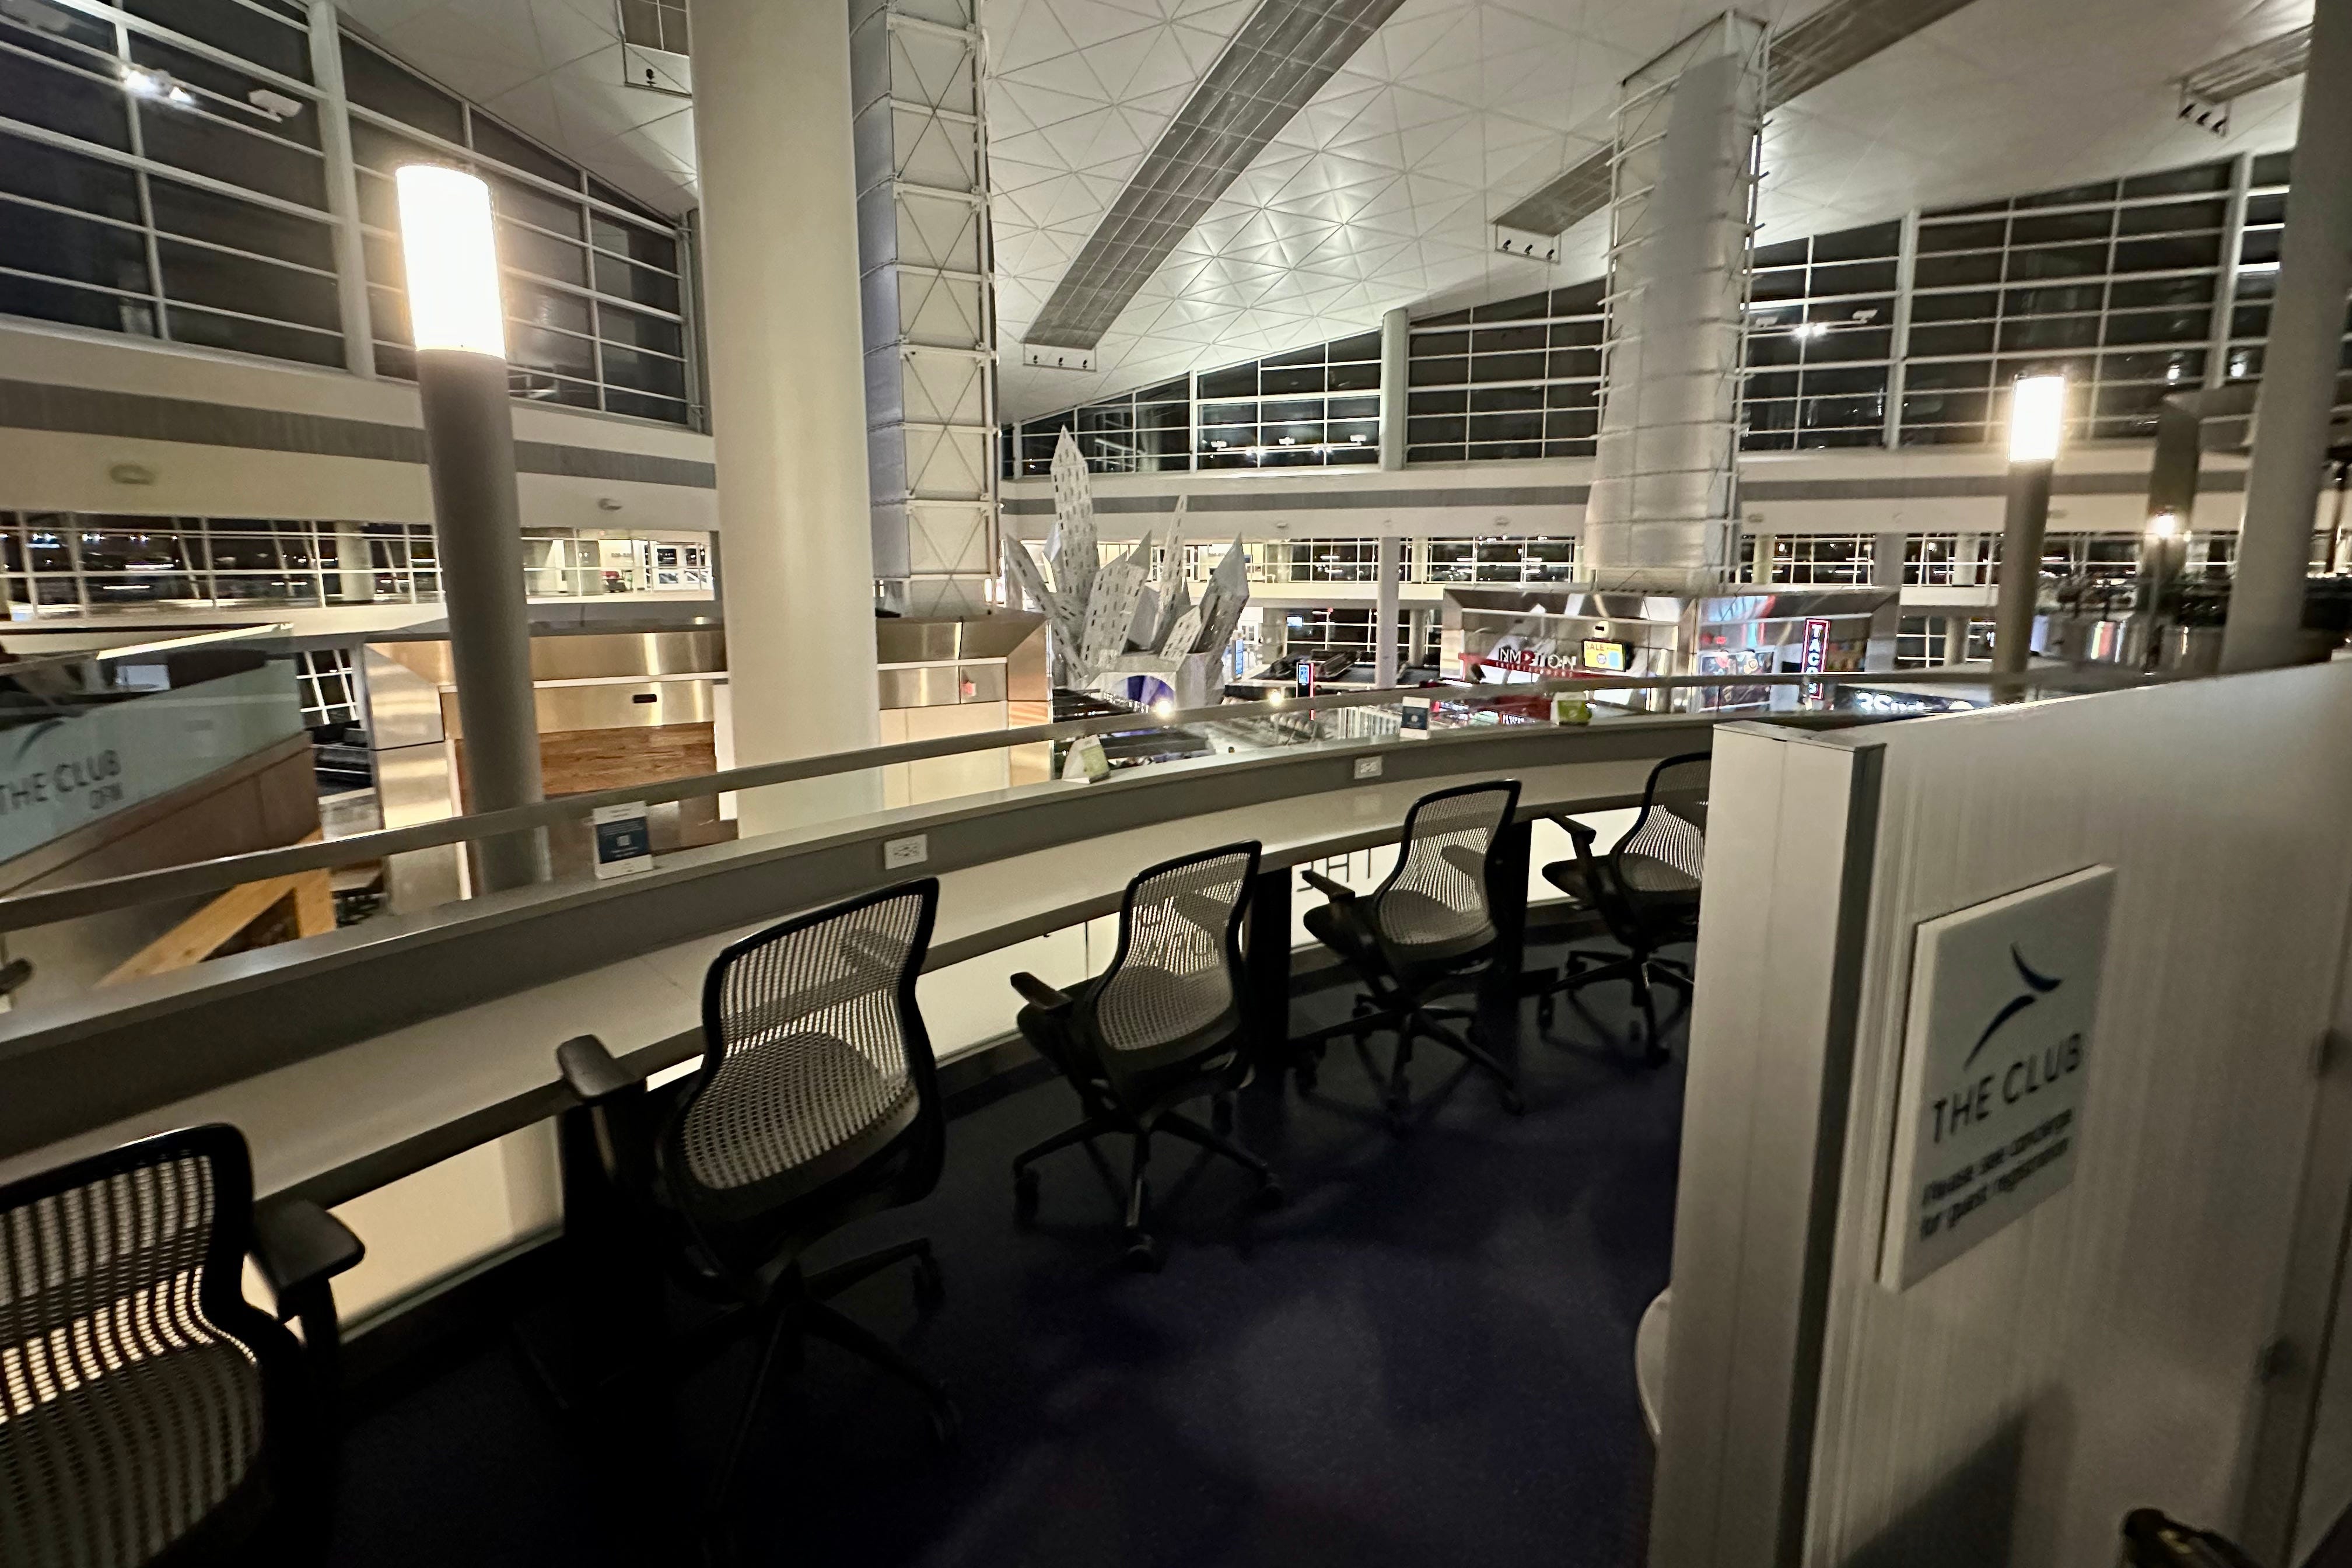 Priority Pass lounge review: The Club CHS - William Lee - Medium